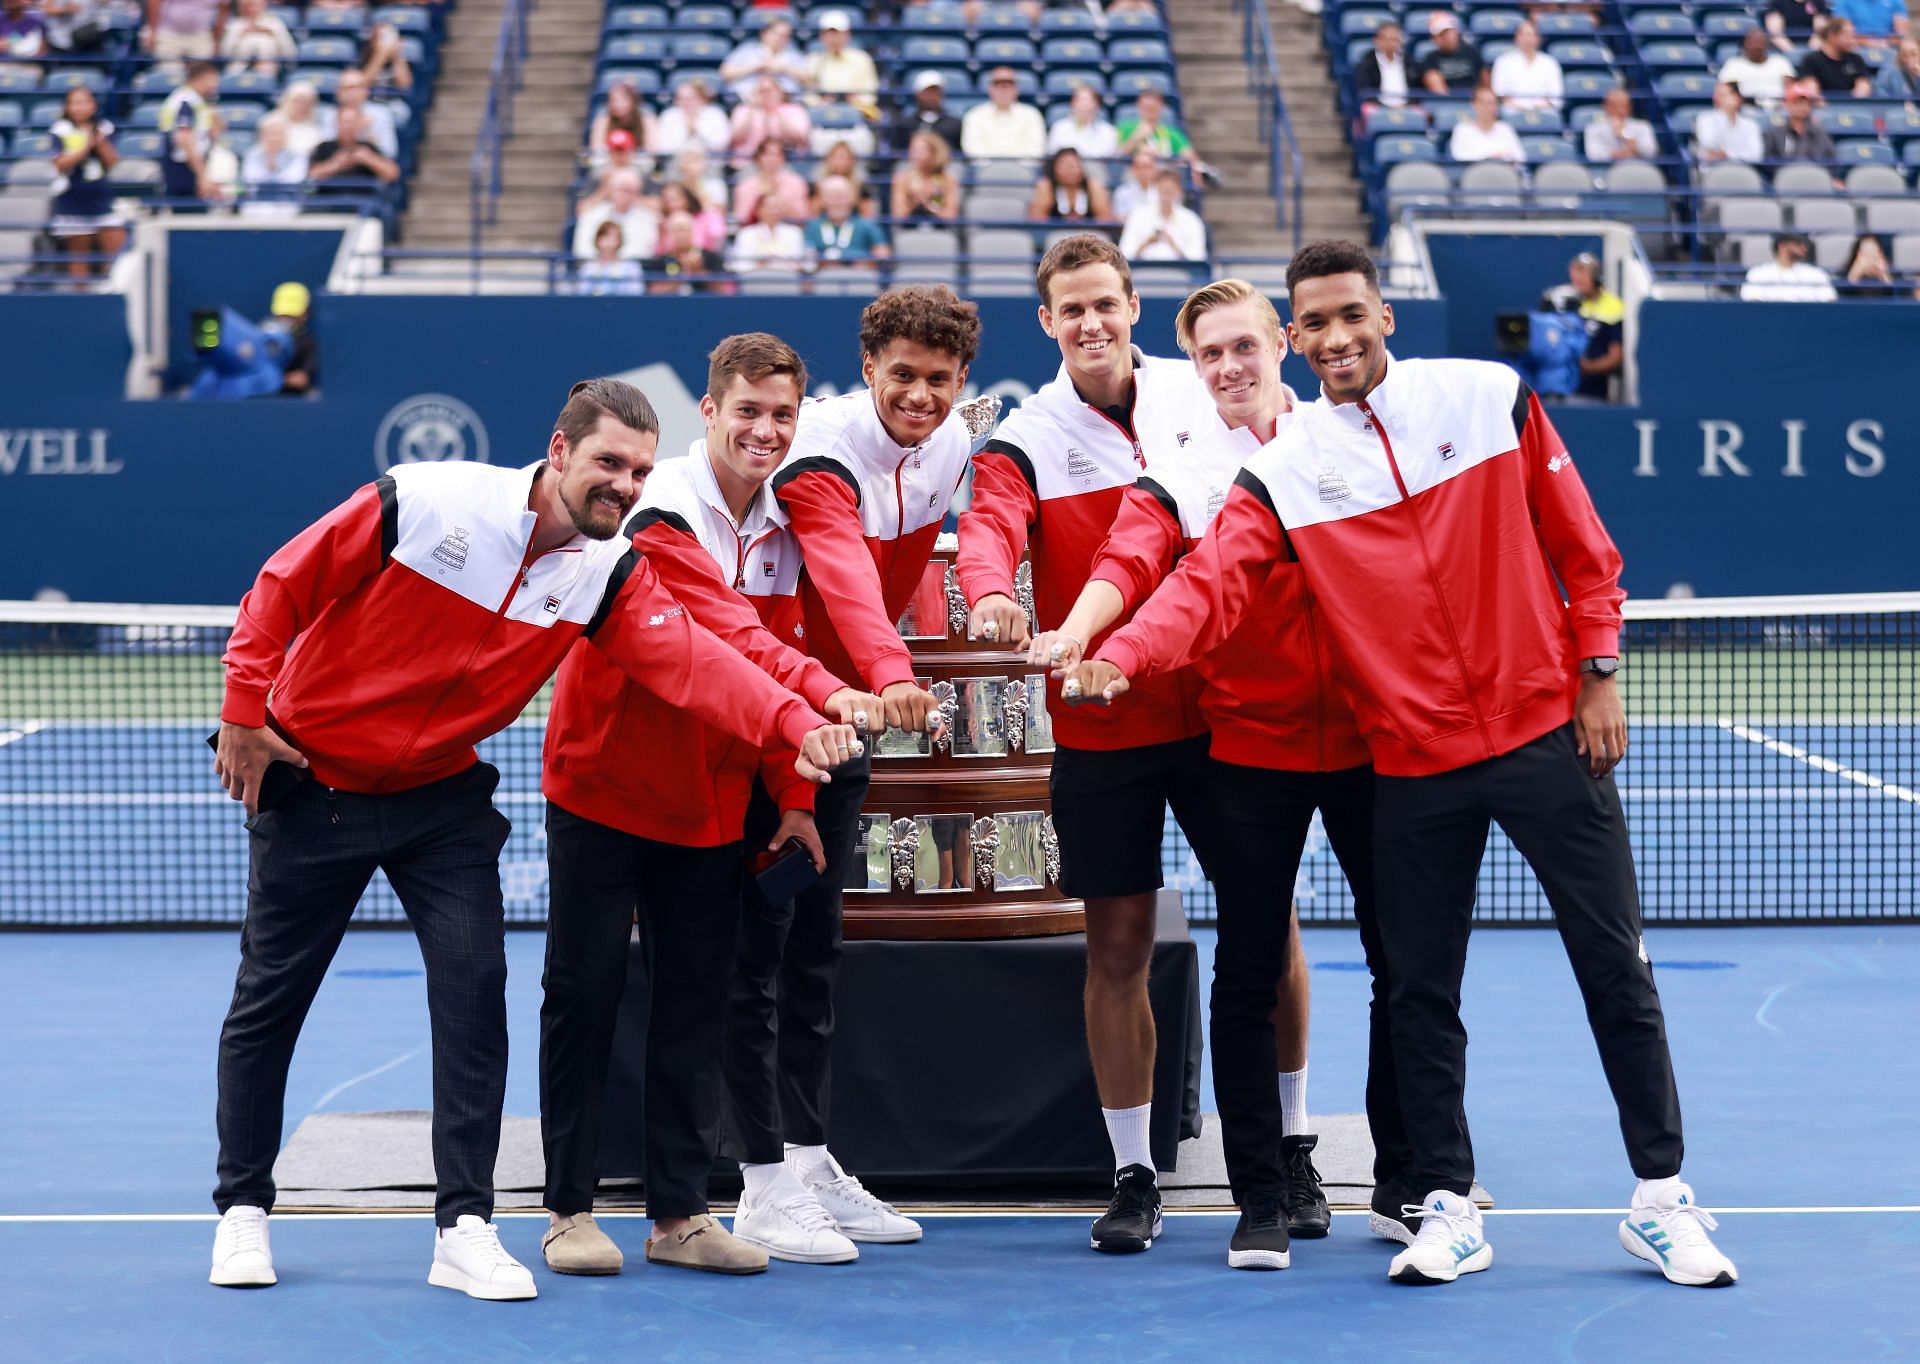 Canada won the 2022 Davis Cup, entering as substitutes after Russia was withdrawn from the event